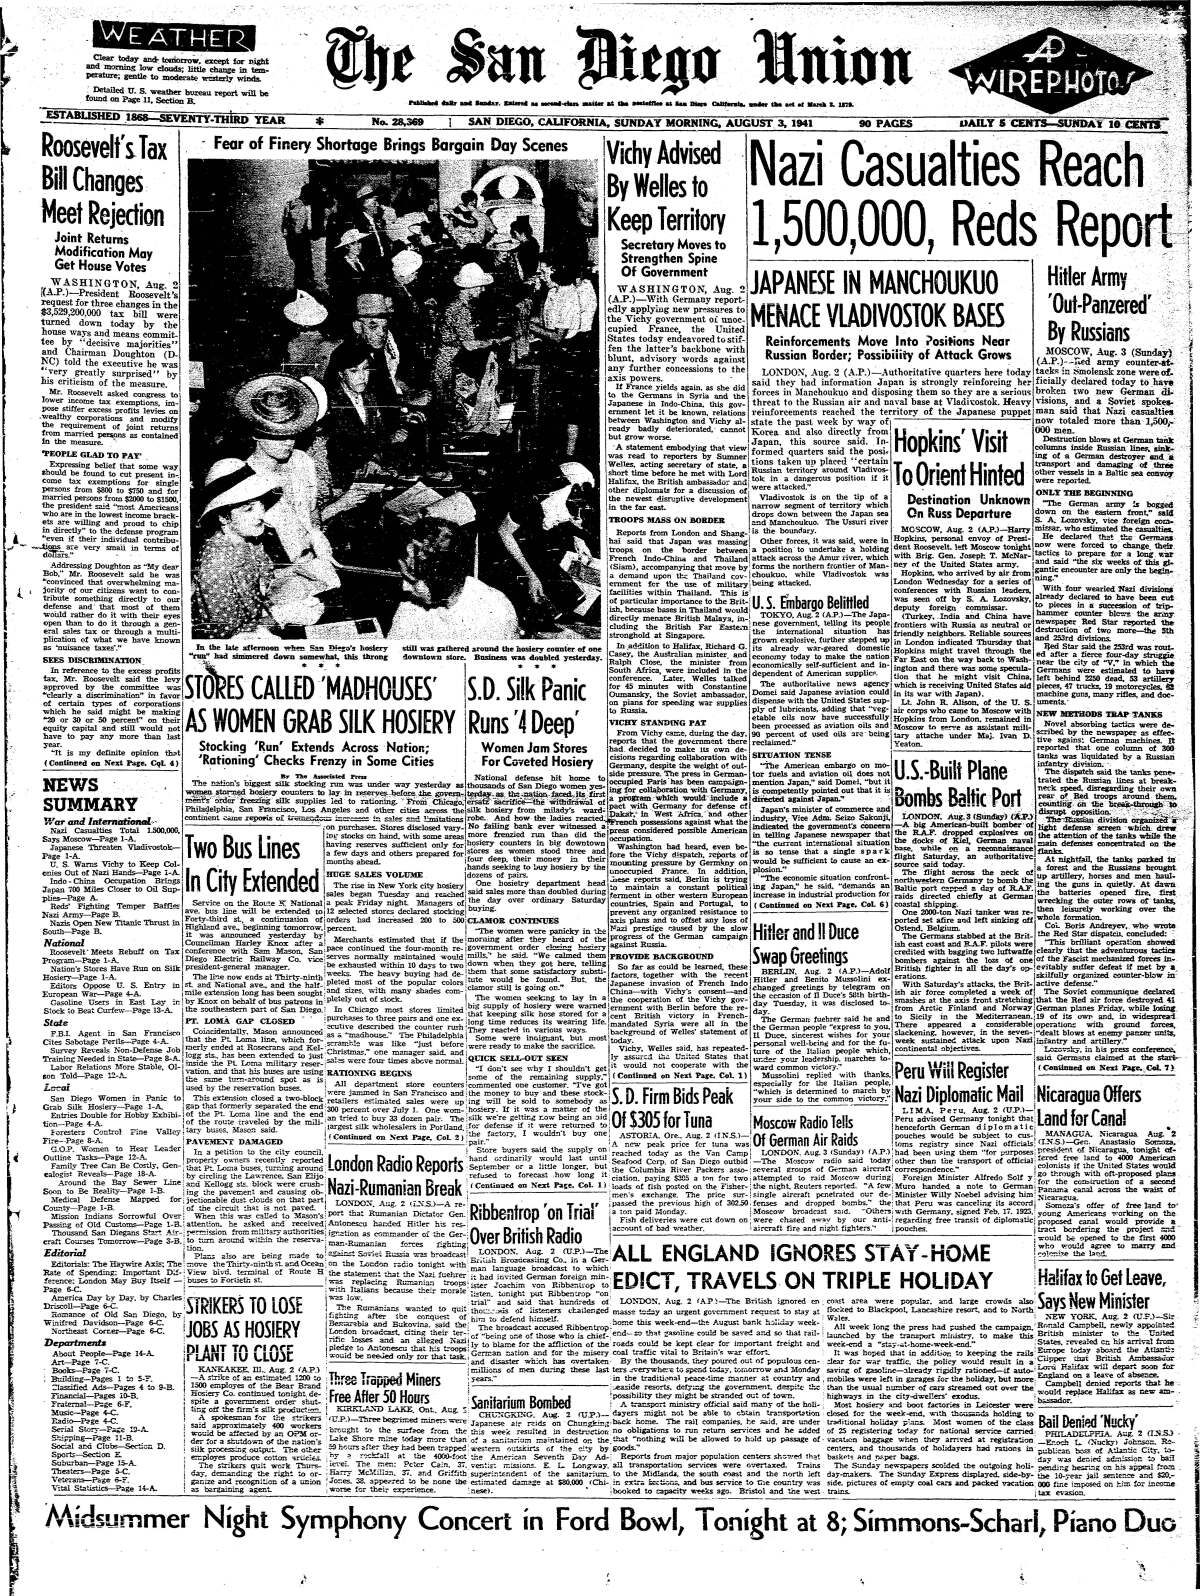 Front page of The San Diego Union, August 3, 1941.